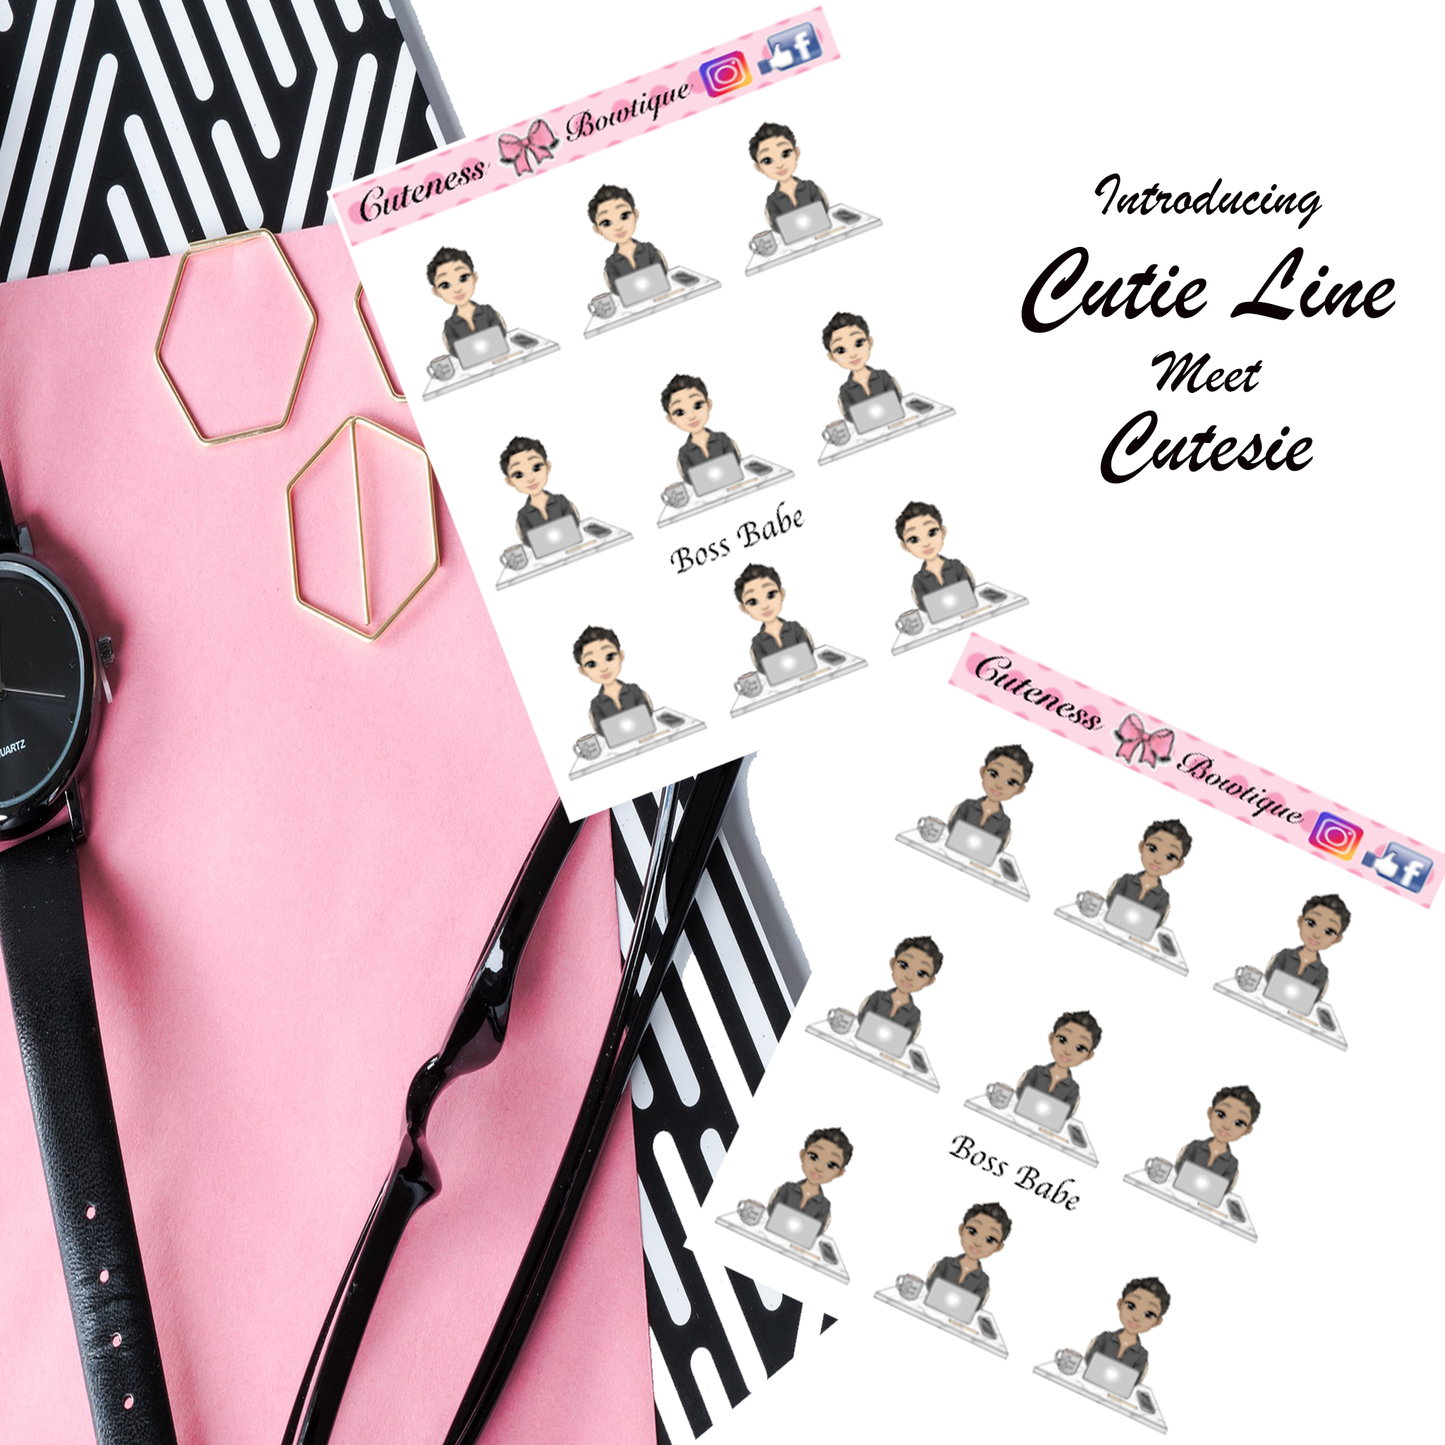 The Cutie Line Icon Sticker Sheet | Cuteness Planner Stickers for Agendas, Planners, Notebooks, Dividers |  BOSS BABE